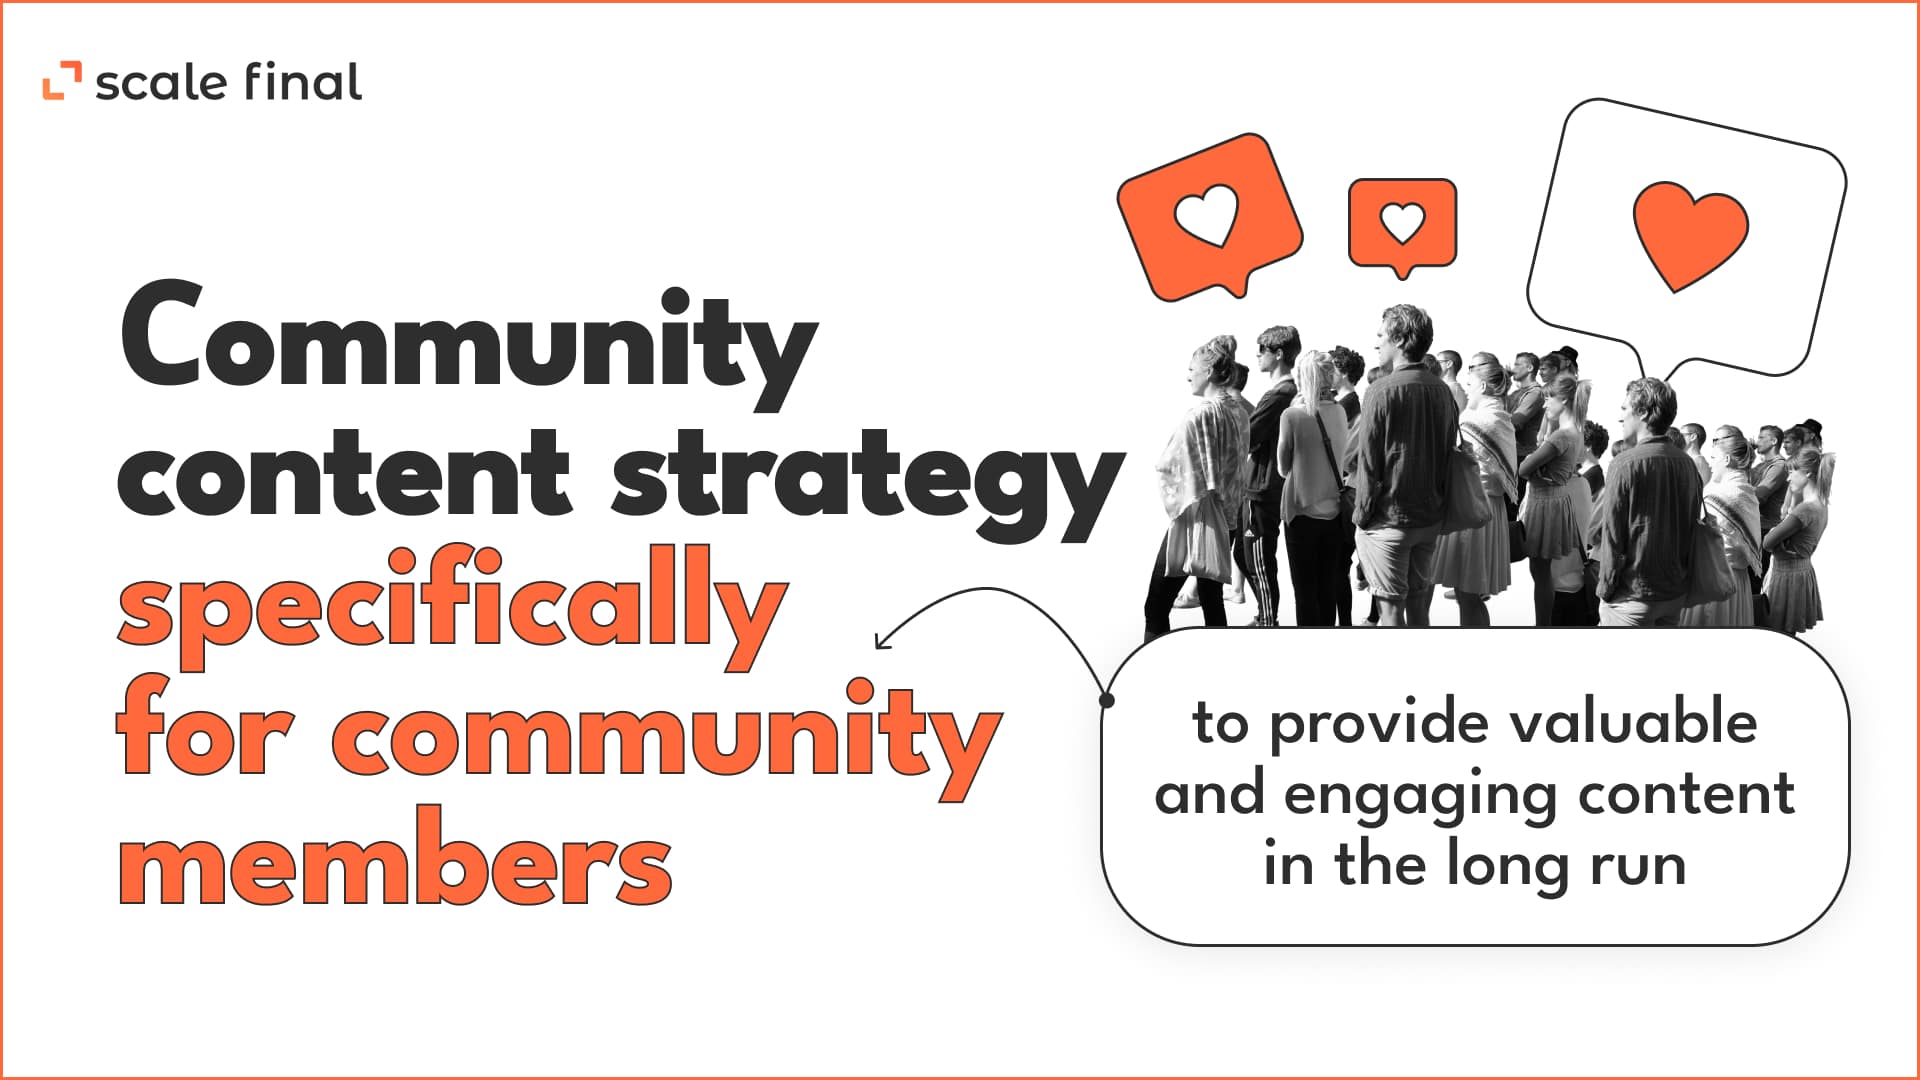 Сommunity content strategy specifically for community members to provide valuable and engaging content in the long run